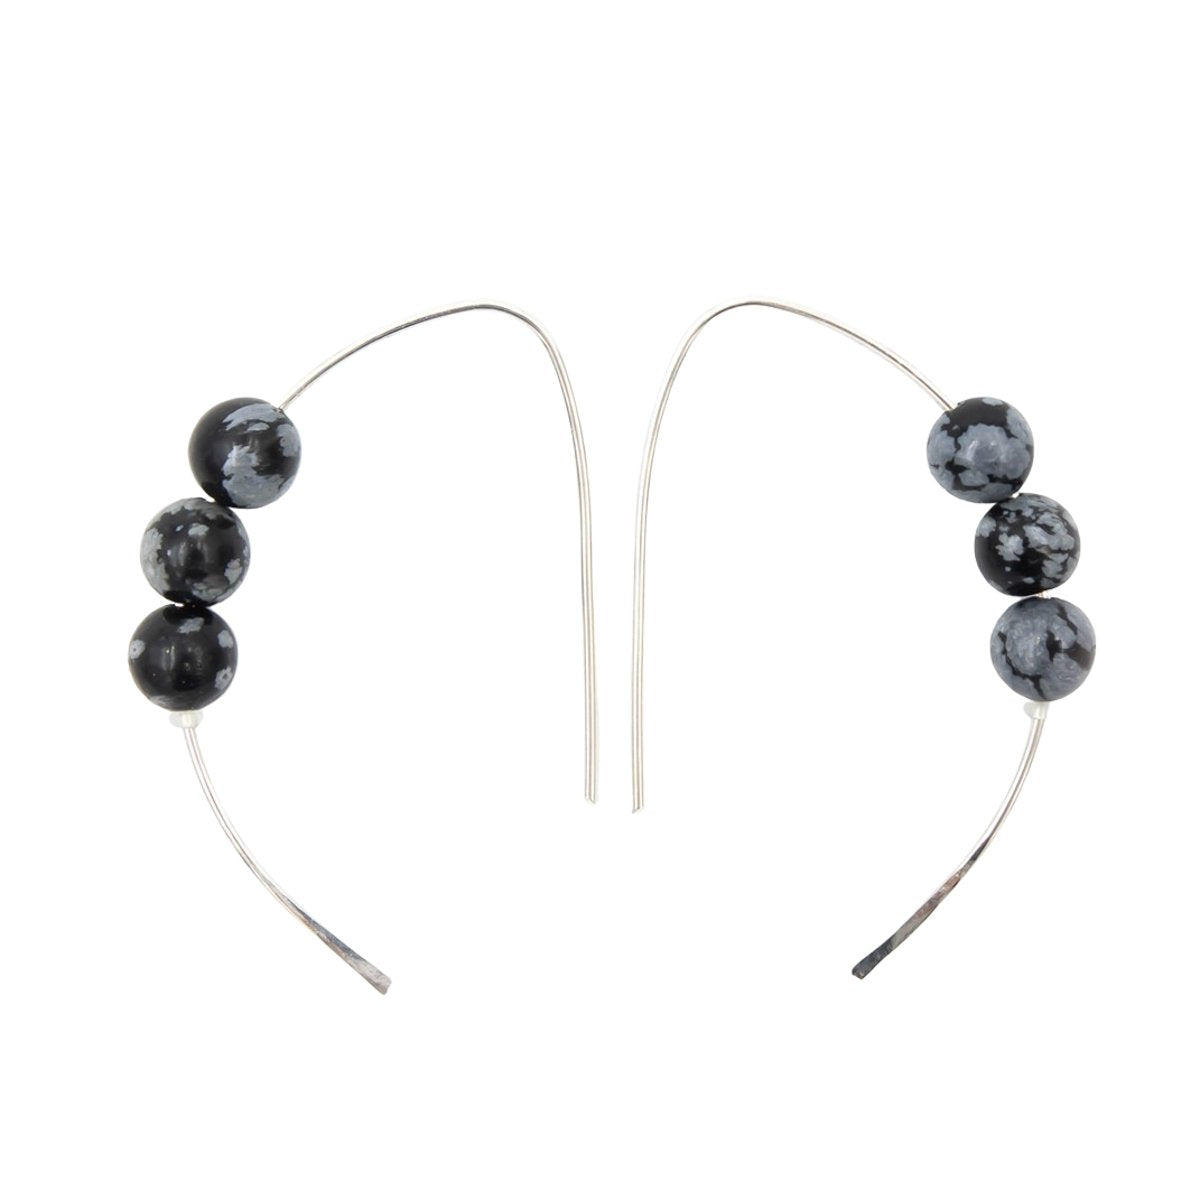 Earth Song Jewelry - Handmade snowflake obsidian sterling silver curves earrings